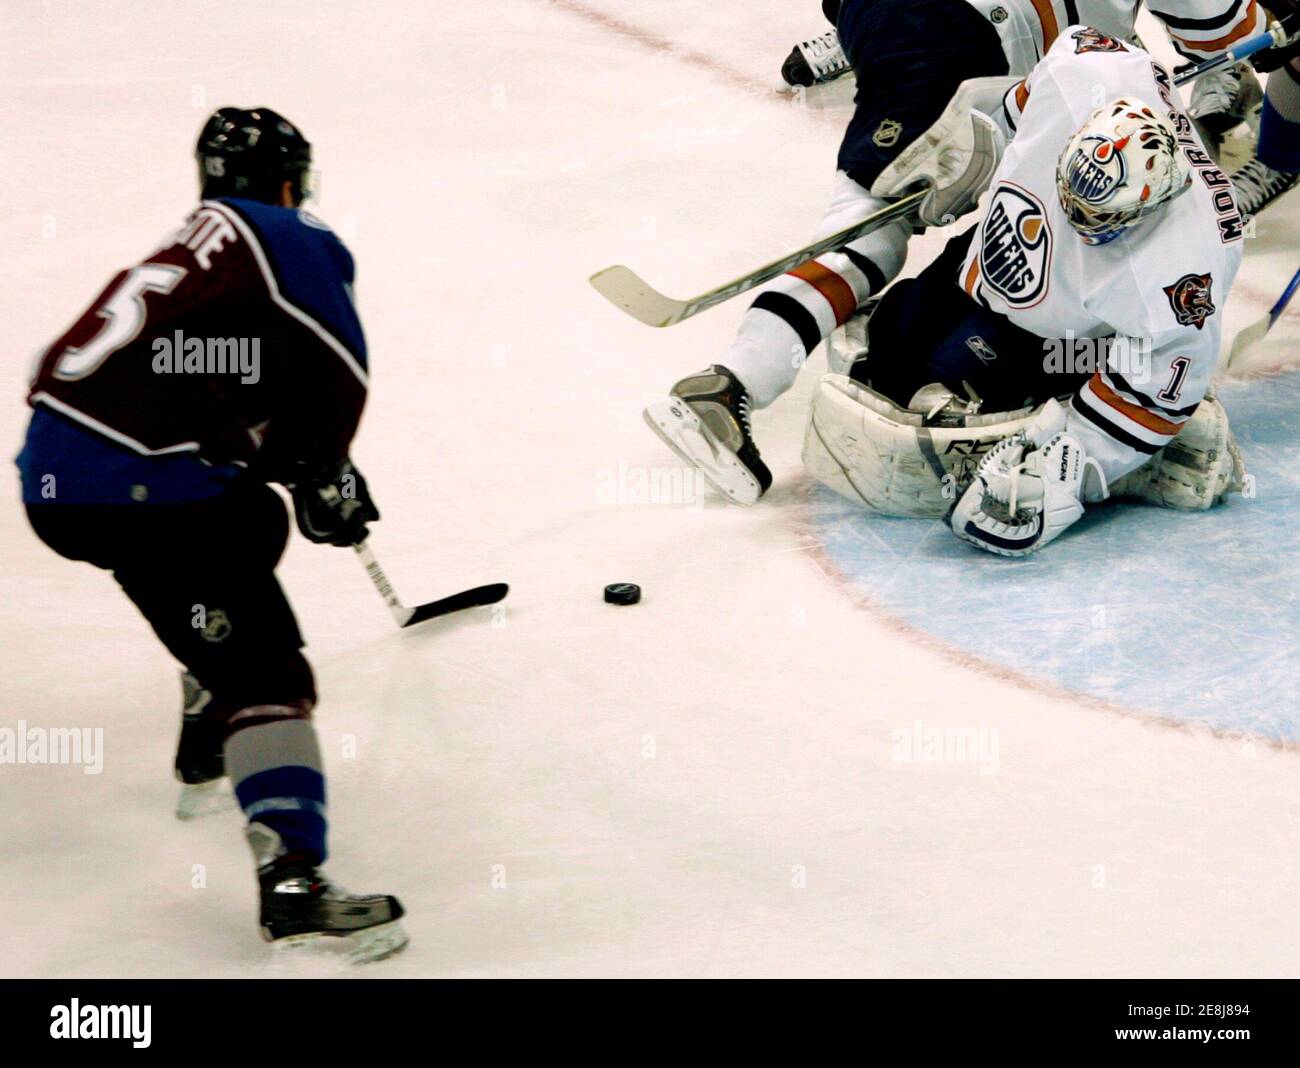 Colorado Avalanche winger Andrew Brunette (L) scores a goal past Edmonton Oilers goalie Michael Morrison (R) in the third period of NHL action in Denver, Colorado February 7, 2006. The Avlanche won the game 5 - 2. REUTERS/Rick Wilking Stock Photo